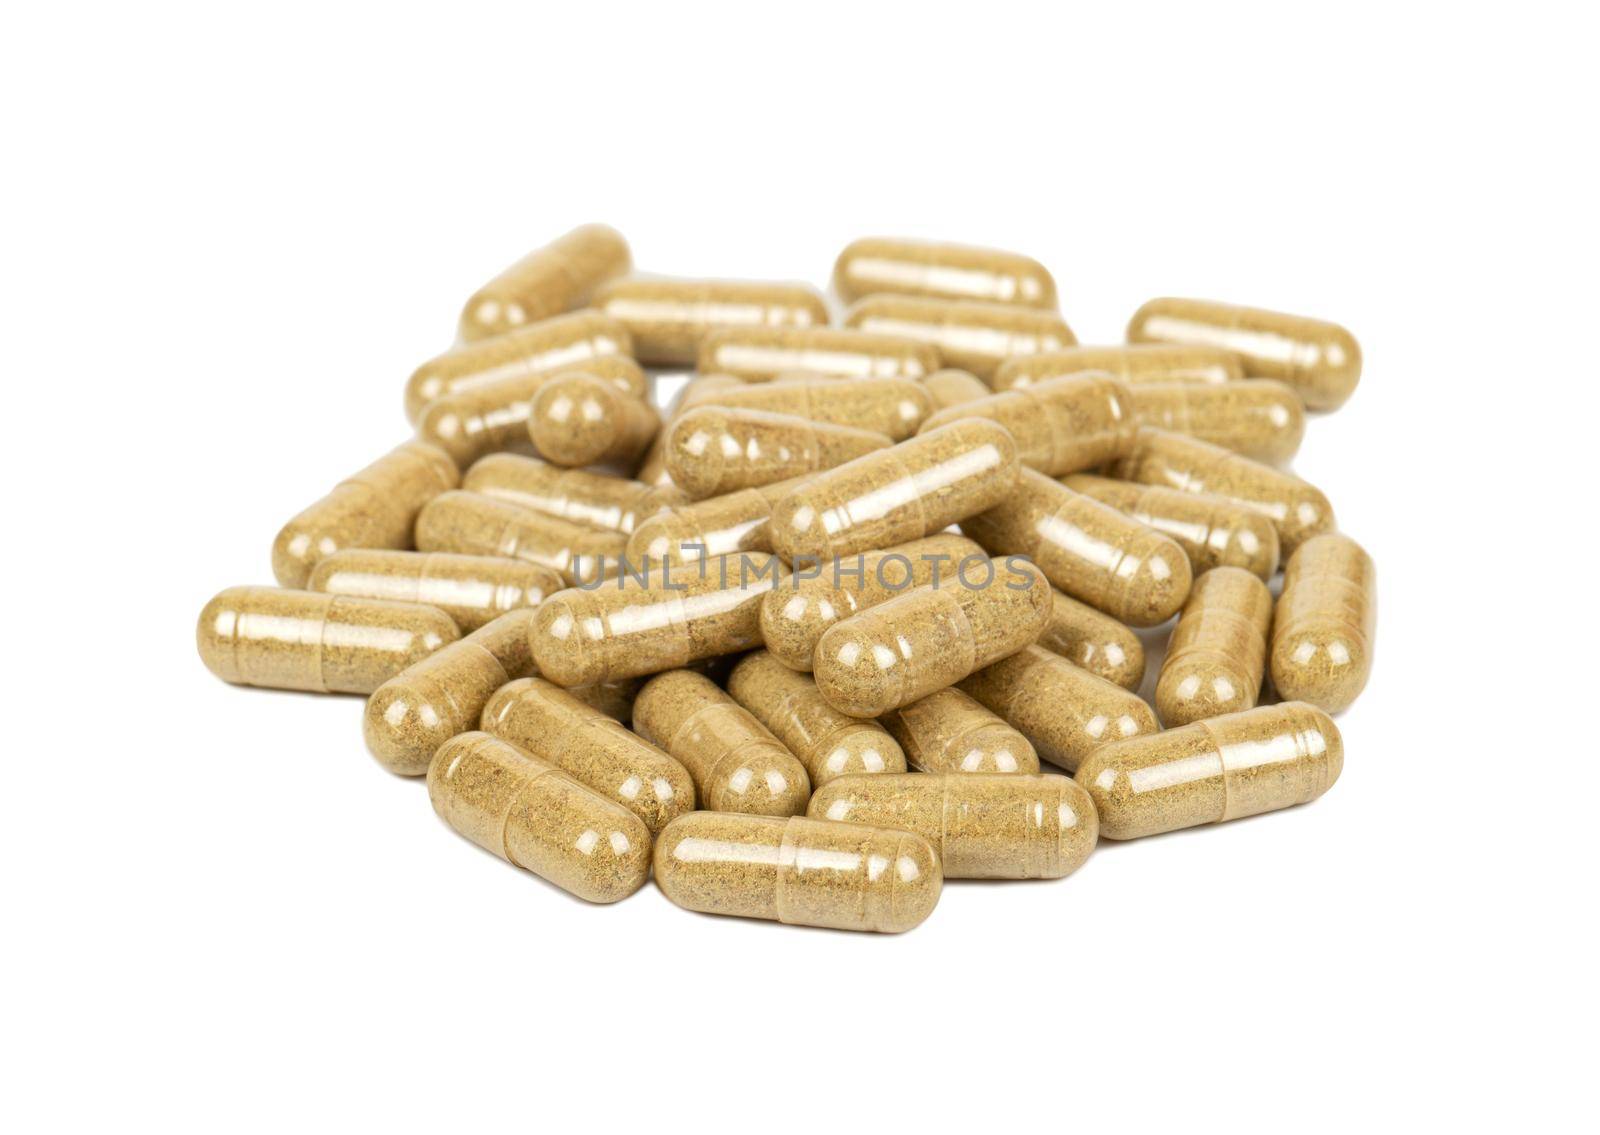 Pile of scattered homeopathic capsules on a white background